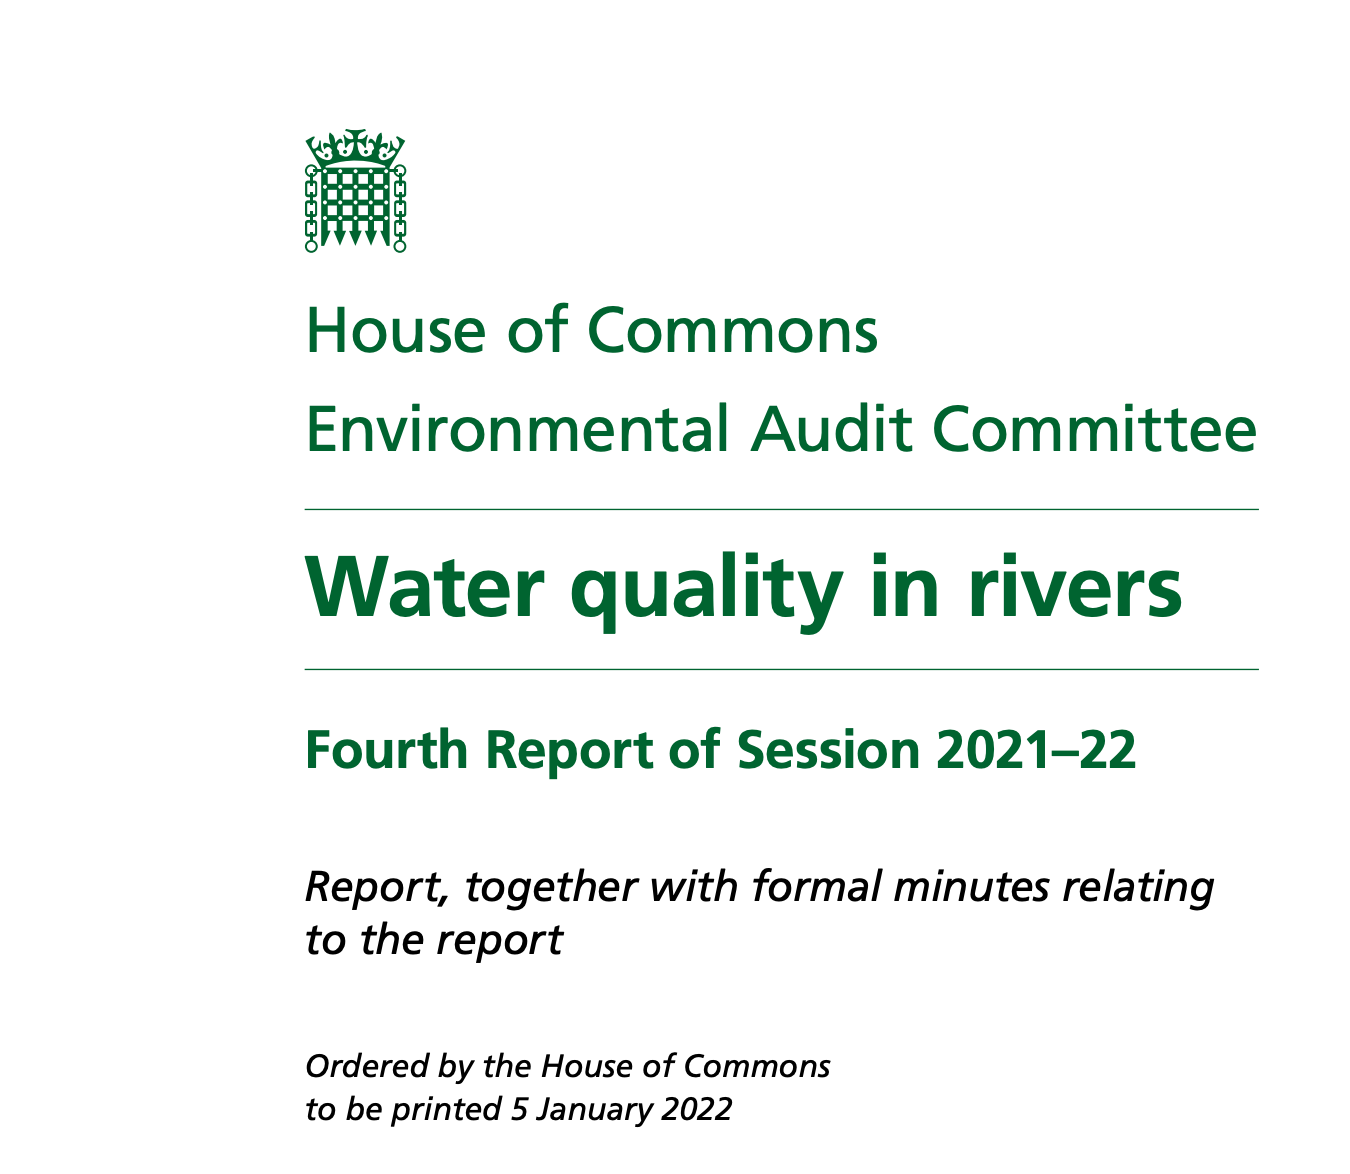 A report on the water quality in UK rivers